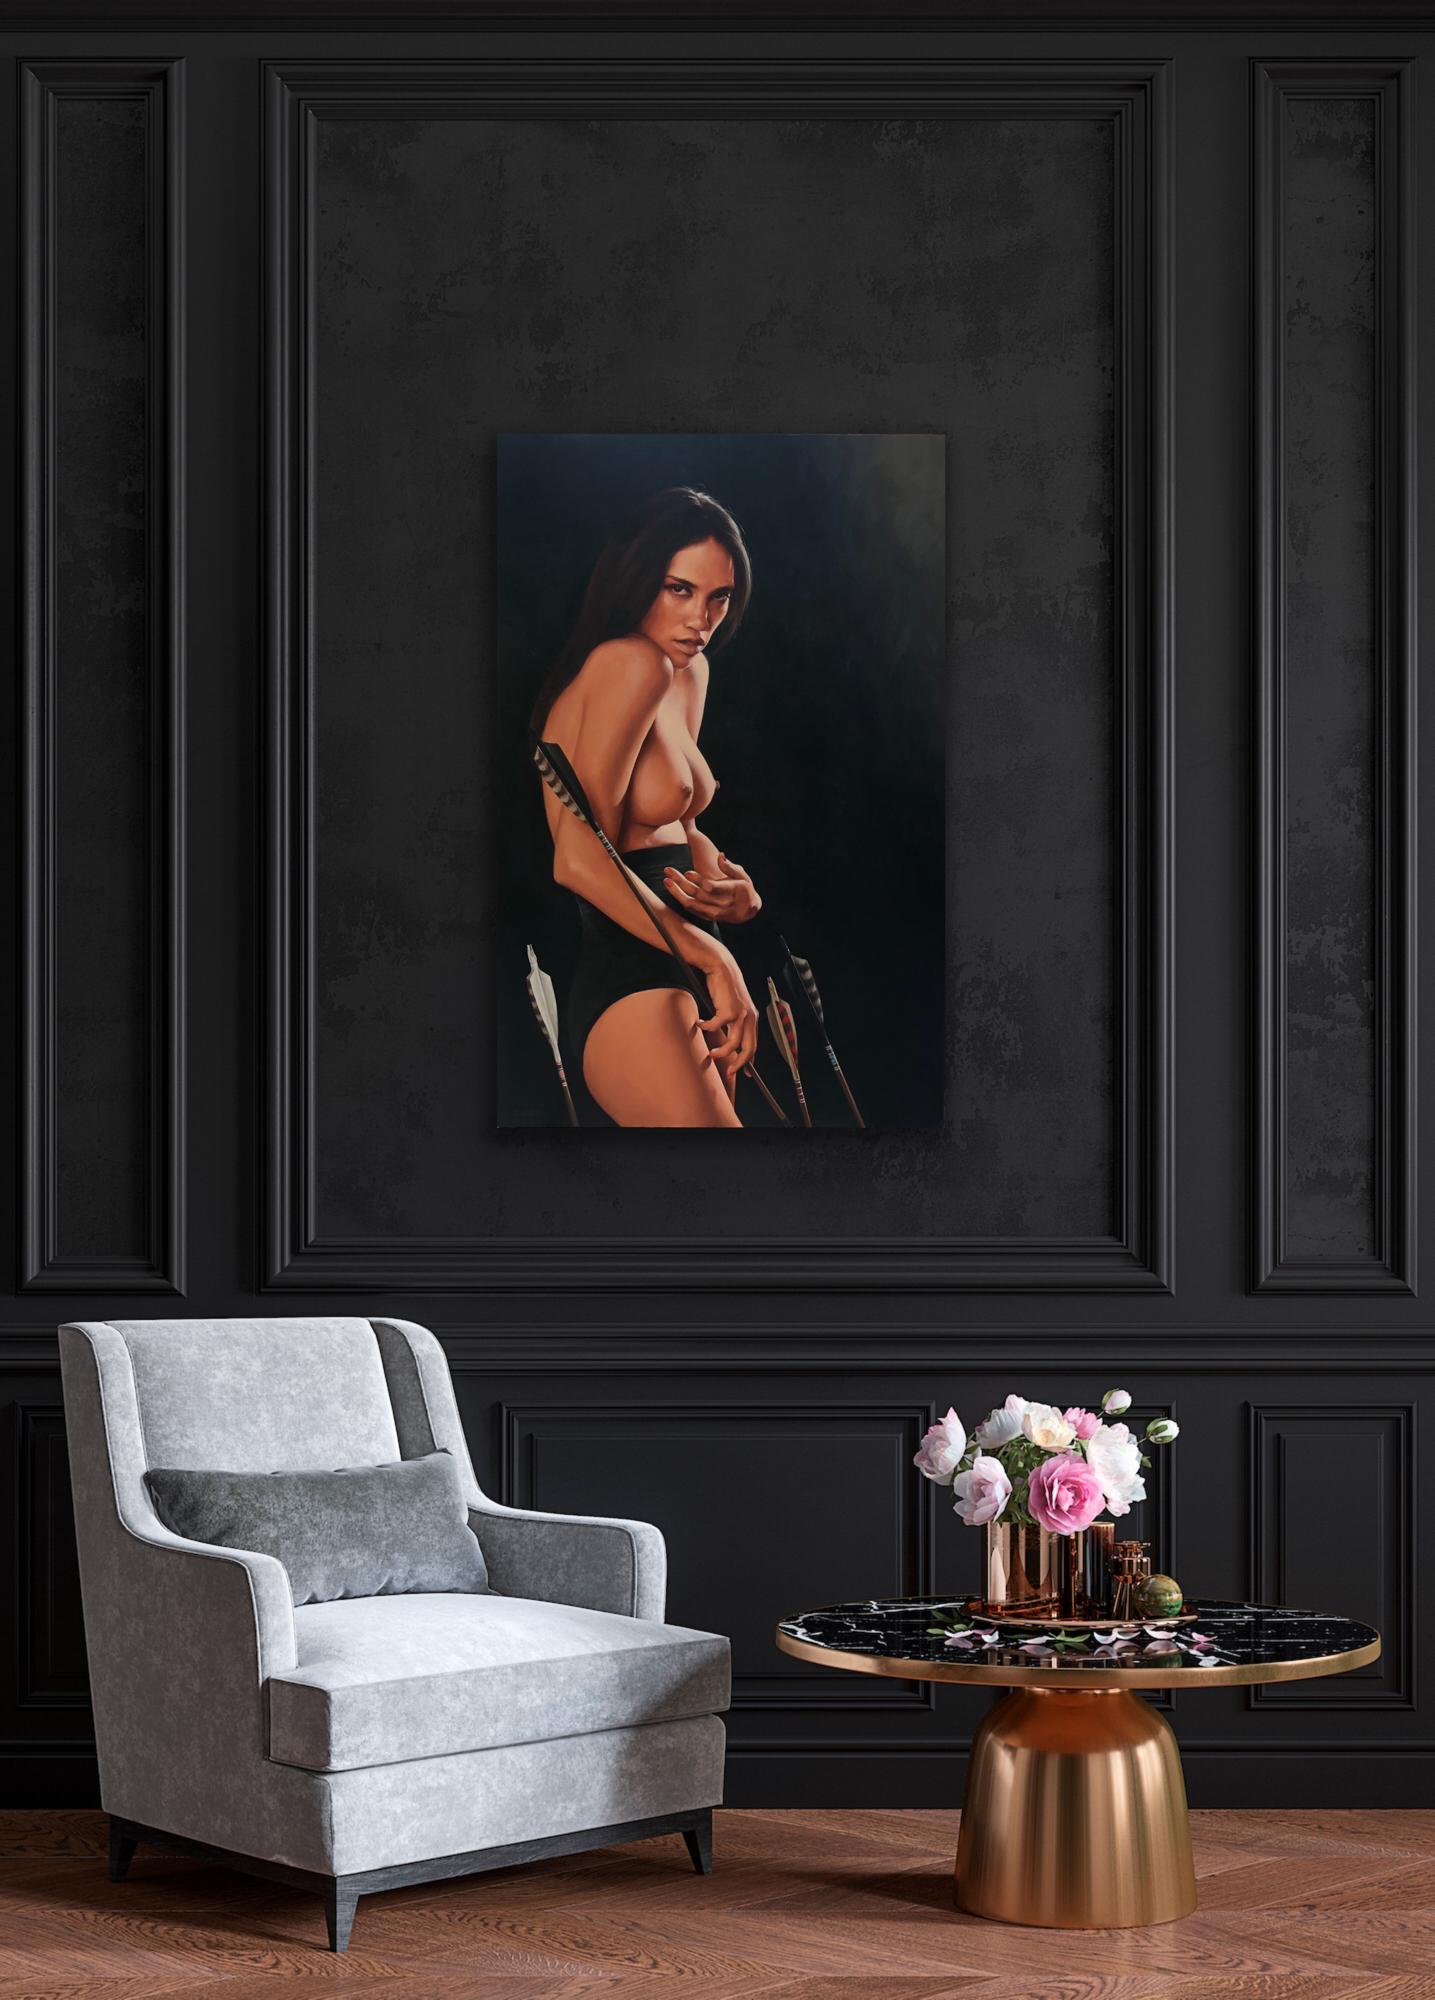 Striking realistic portrait painting of a semi-nude woman with arrows titled 